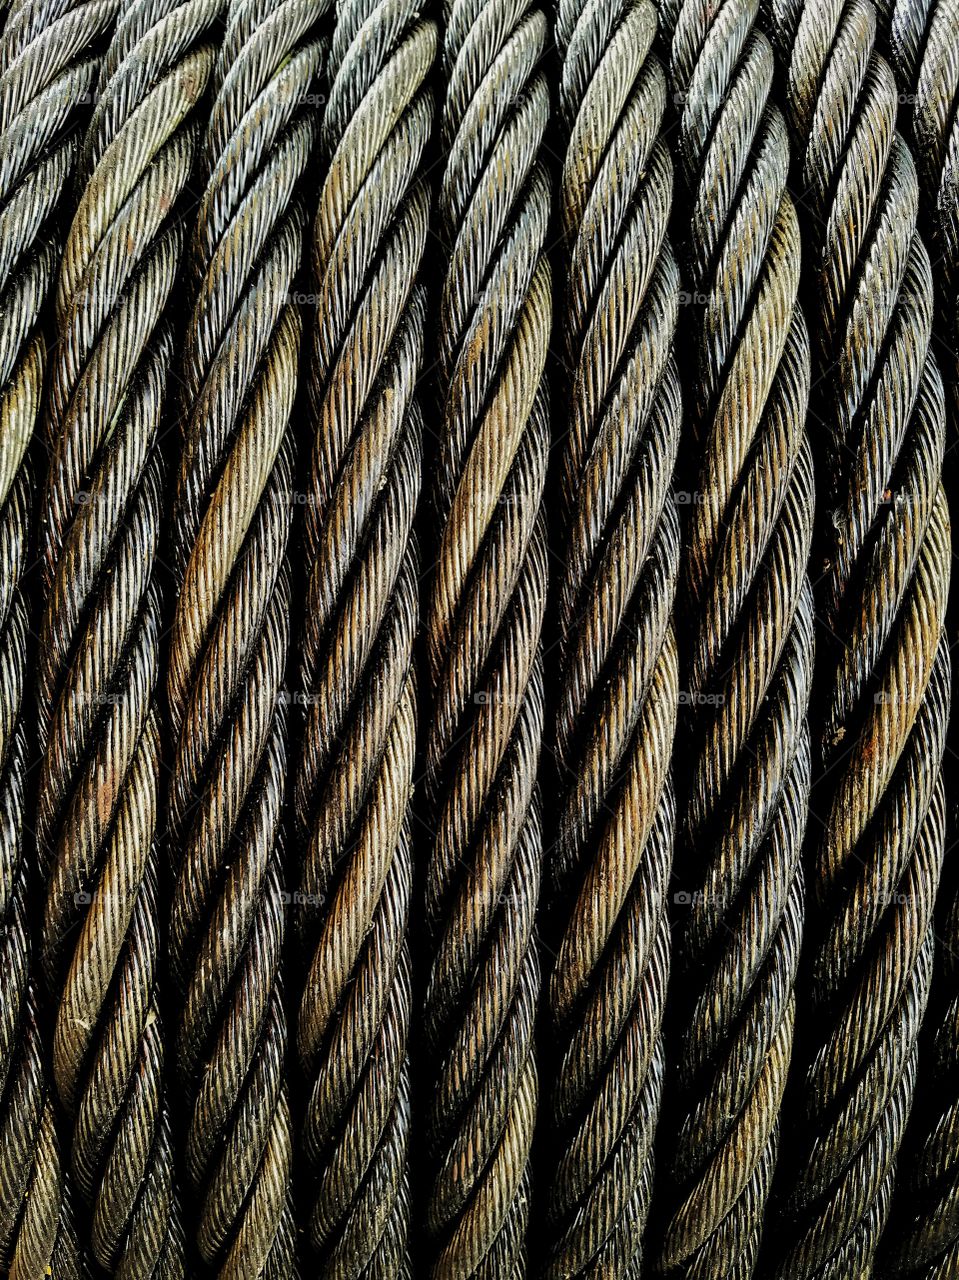 Steel cable closeup